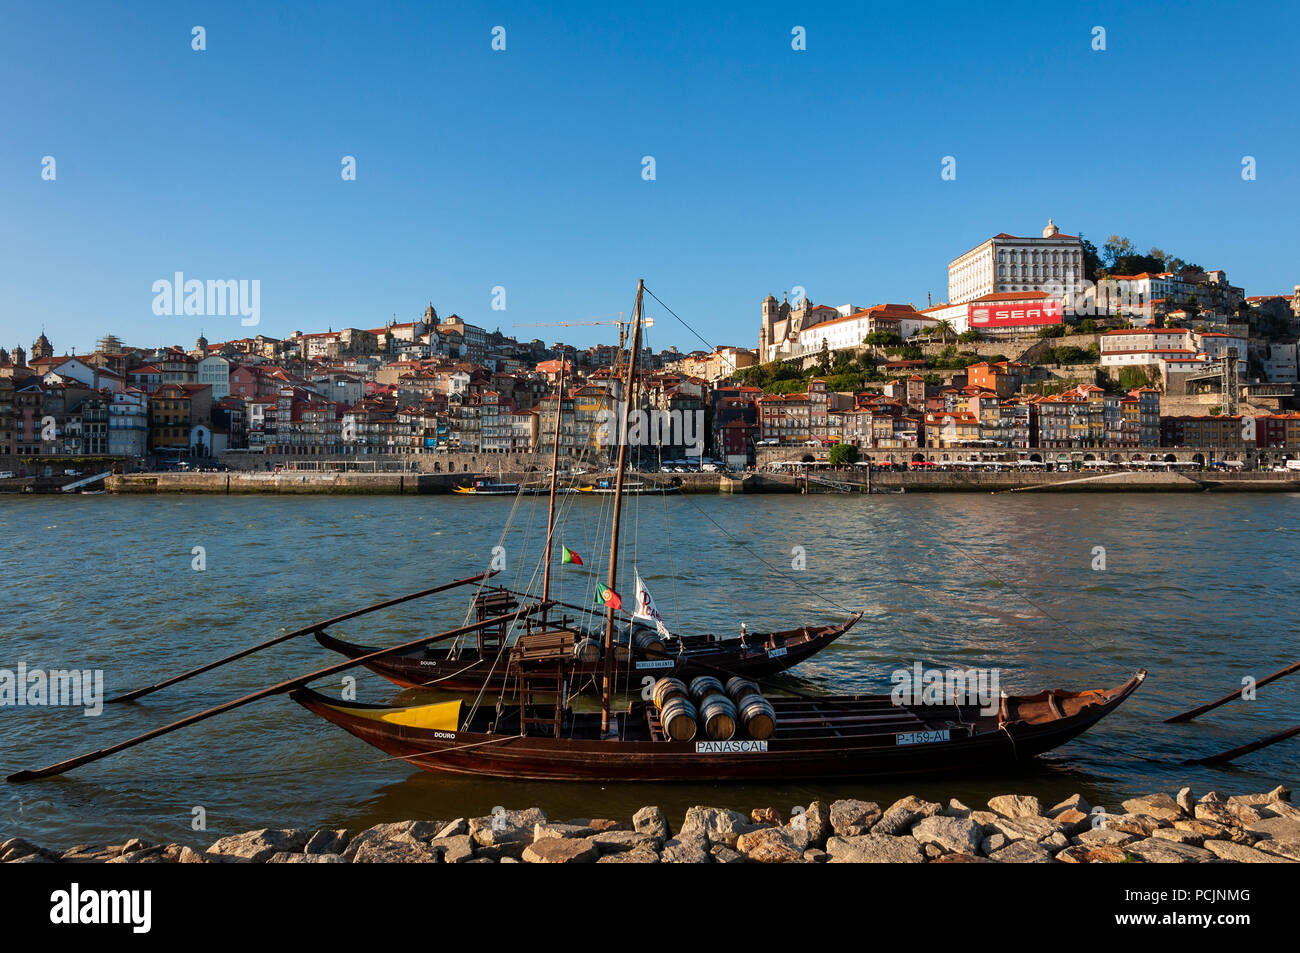 Porto, Portugal - October 4, 2010: View of the Ribeira Neighborhood and the Douro River with Rabelo Boats, in the city of Porto, Portugal Stock Photo